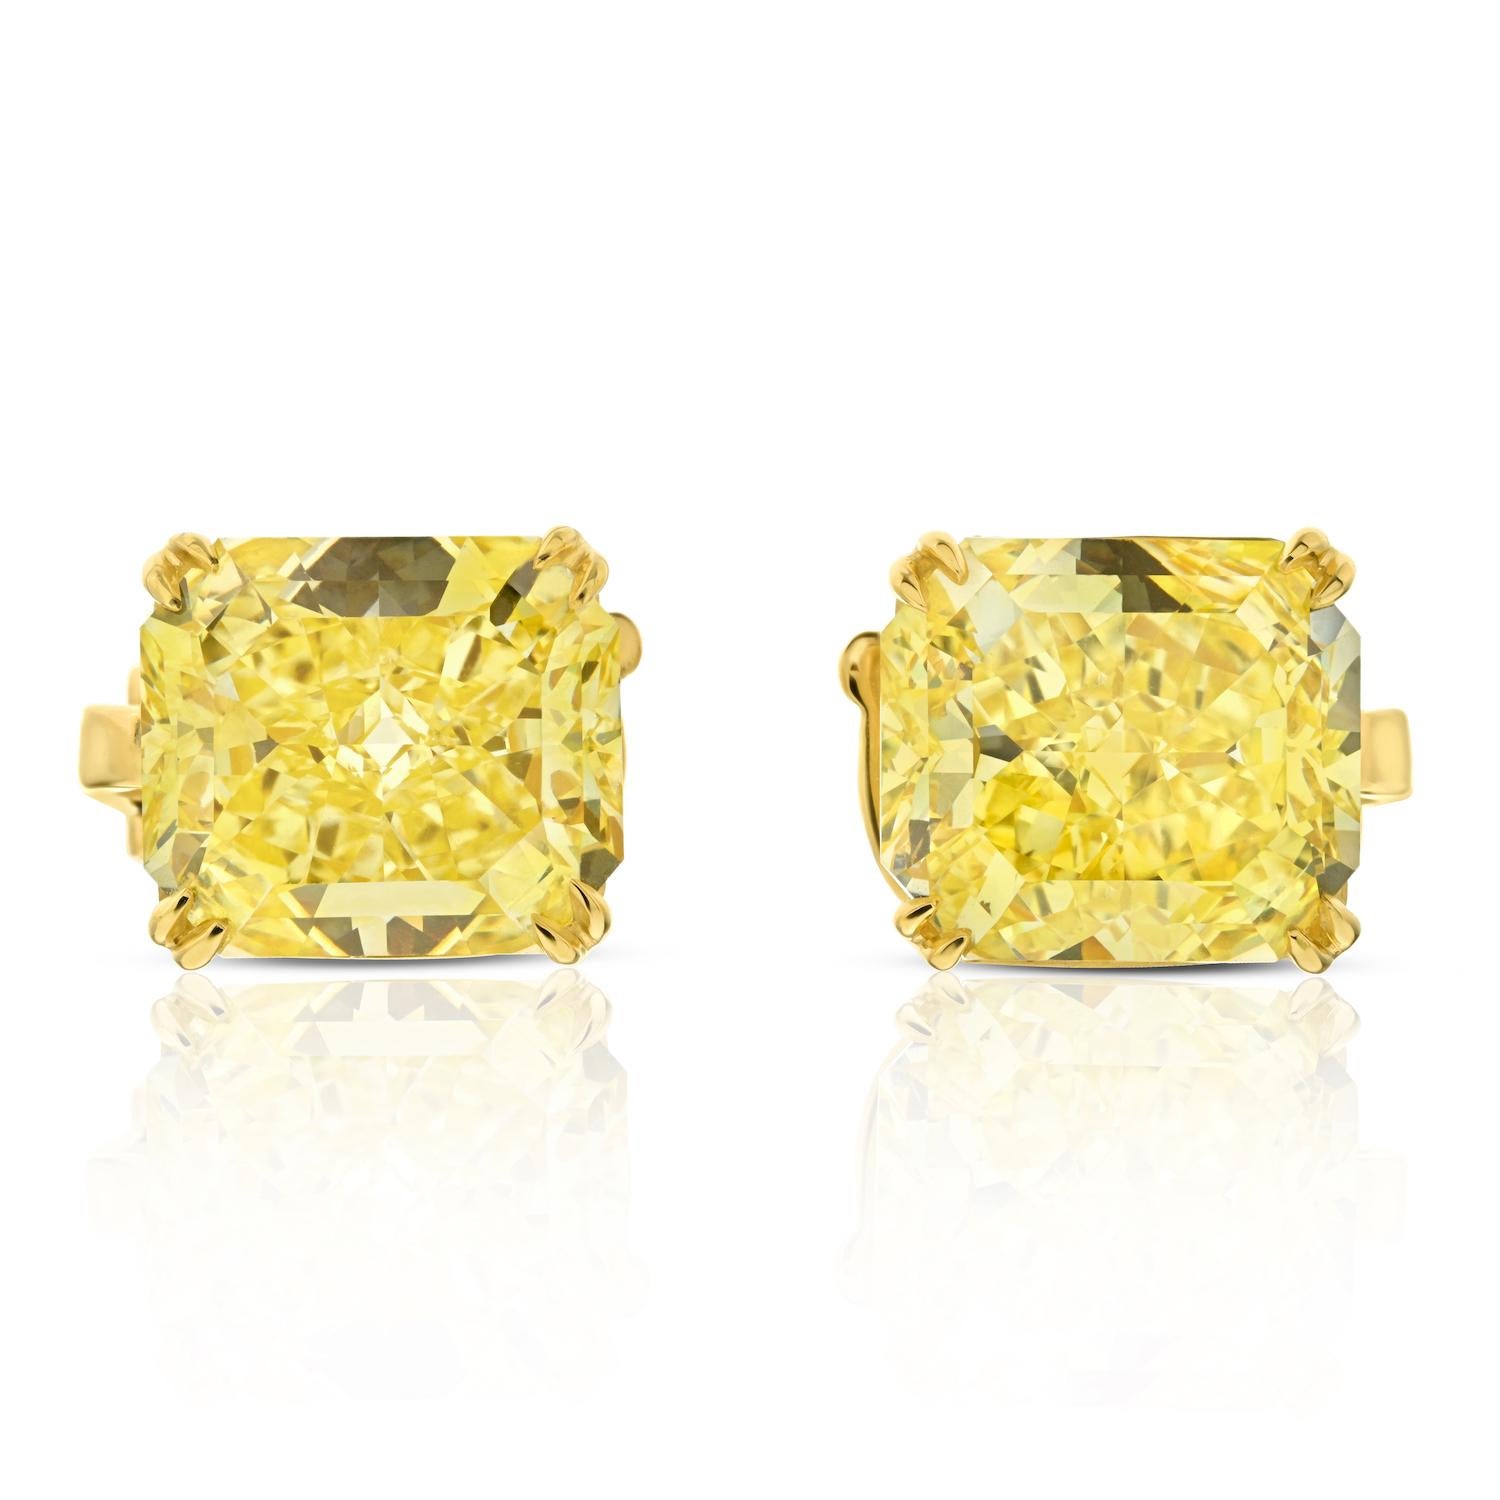 Each centering a radiant cut Fancy Intense Yellow Diamond.

Unique fancy yellow intense diamond stud earrings of 6 carat each, GIA certified VS2 and VVS1 clarity matching diamonds. Diamonds weighing a total of 12.09 carats.

A truly stunning pair of